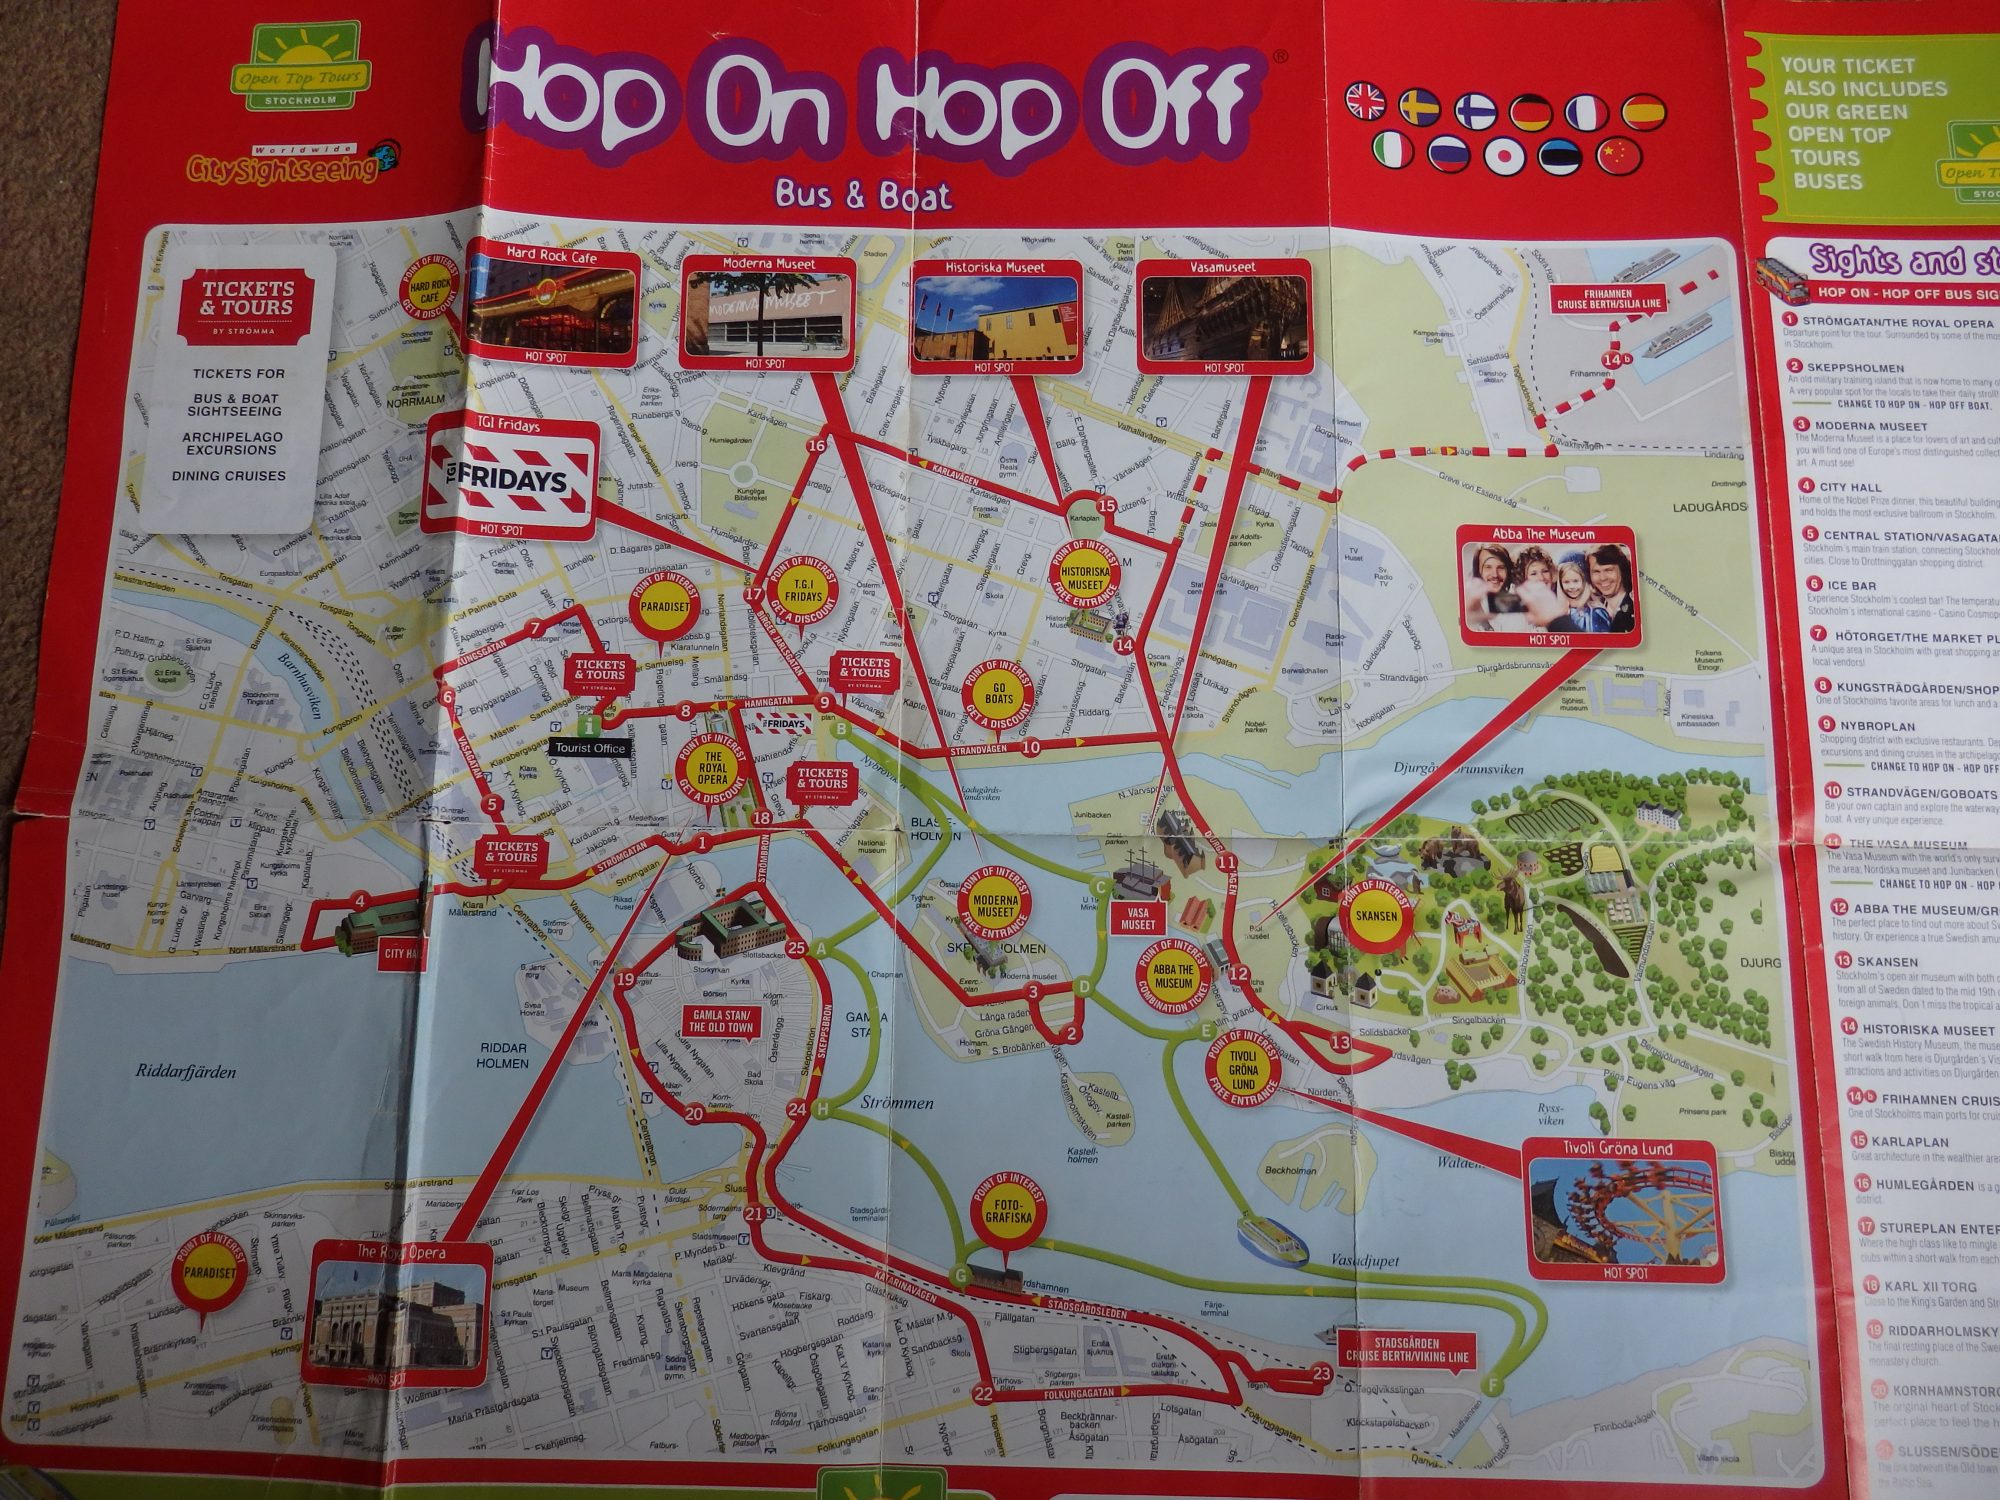 the printed map for the Hop On Hop Off routes: red for the bus, green for the boat